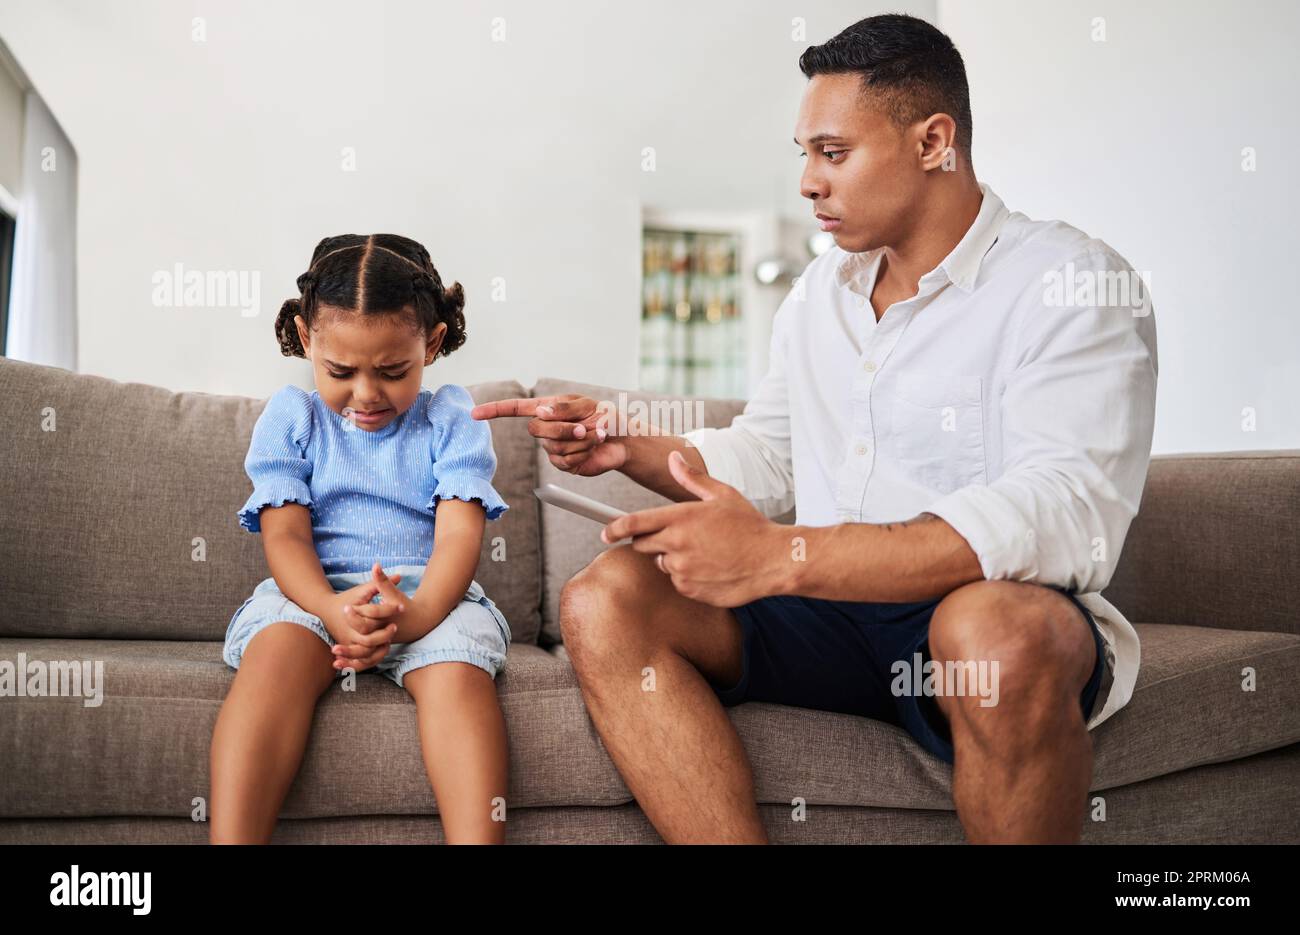 Angry, father with tablet and kid conflict, upset and serious scolding, no screen time with sad child and frustrated parent pointing. Family stress, b Stock Photo